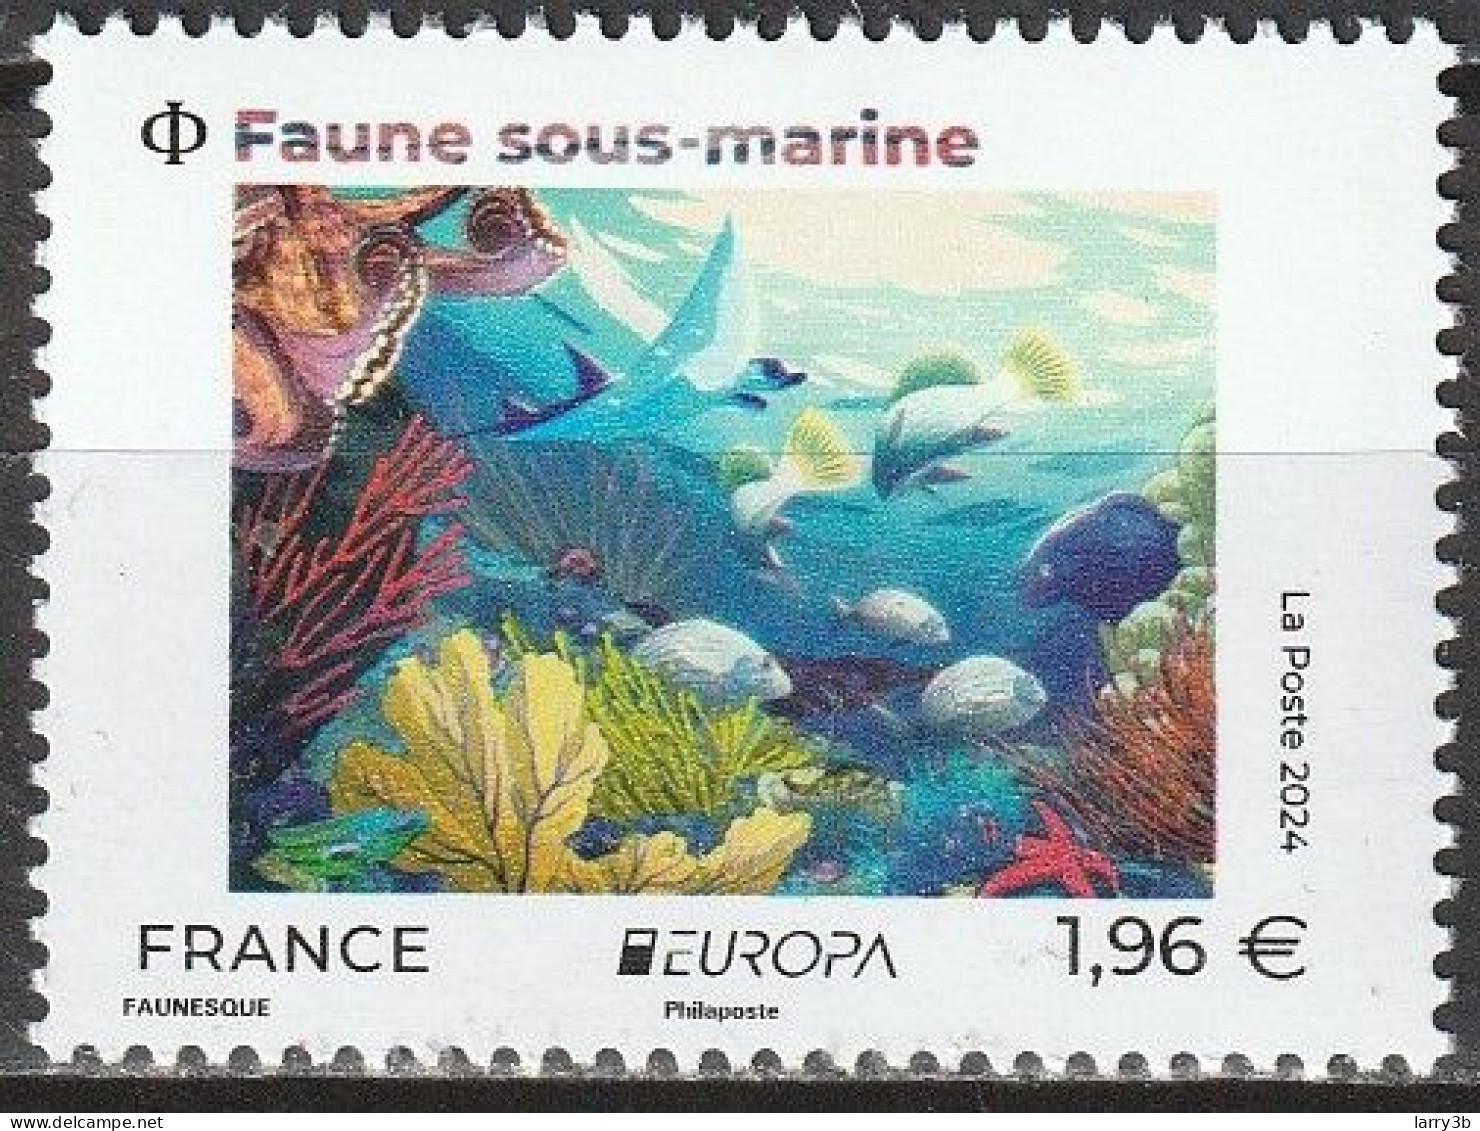 2024 - EUROPA - CEPT FRANCE - "FAUNE SOUS-MARINE" - ISSU FEUILLET 1,96 € - NEUF ** - MNH - 2024